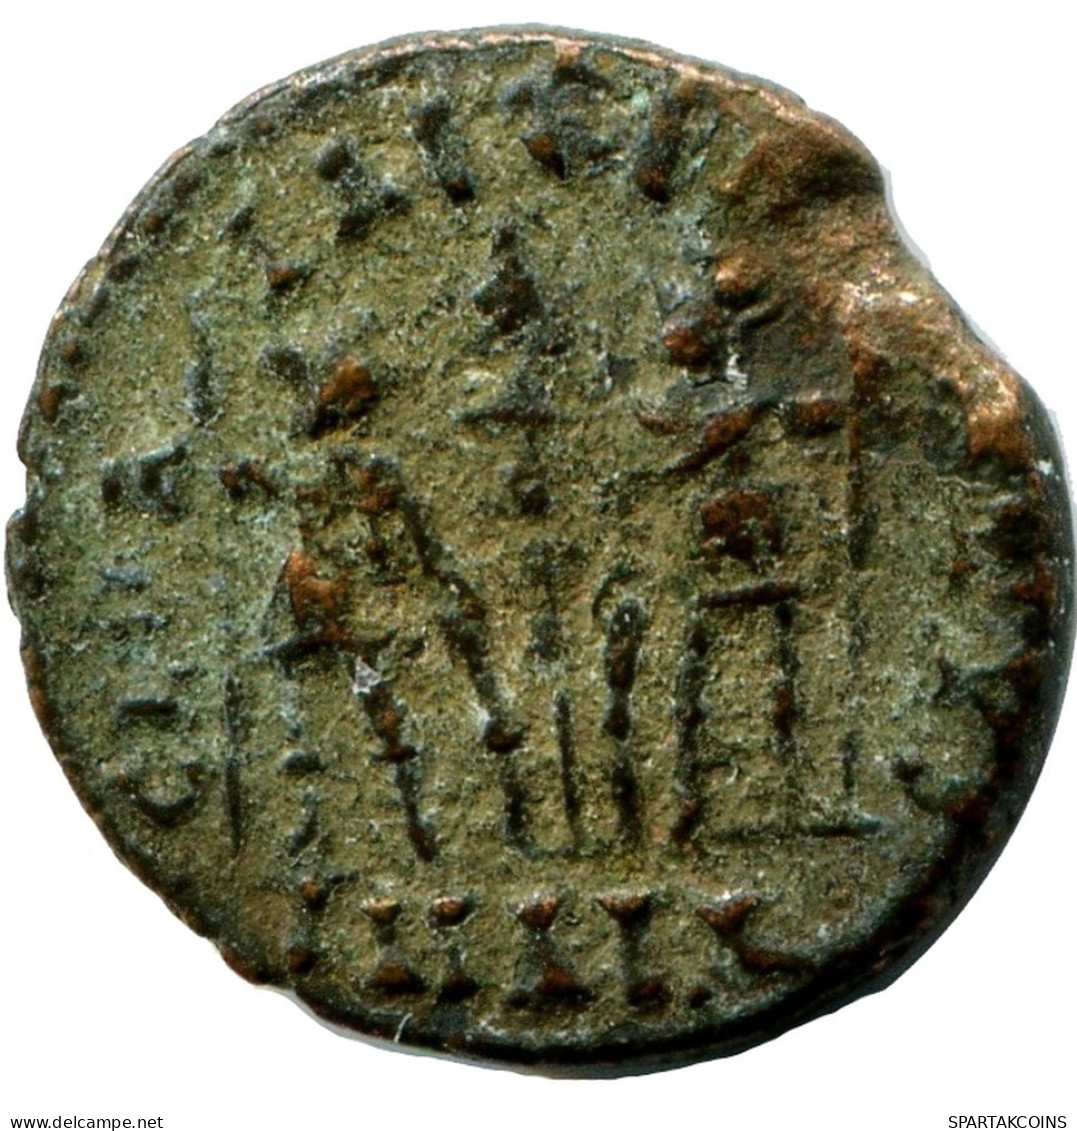 CONSTANS MINTED IN ALEKSANDRIA FOUND IN IHNASYAH HOARD EGYPT #ANC11470.14.D.A - The Christian Empire (307 AD To 363 AD)